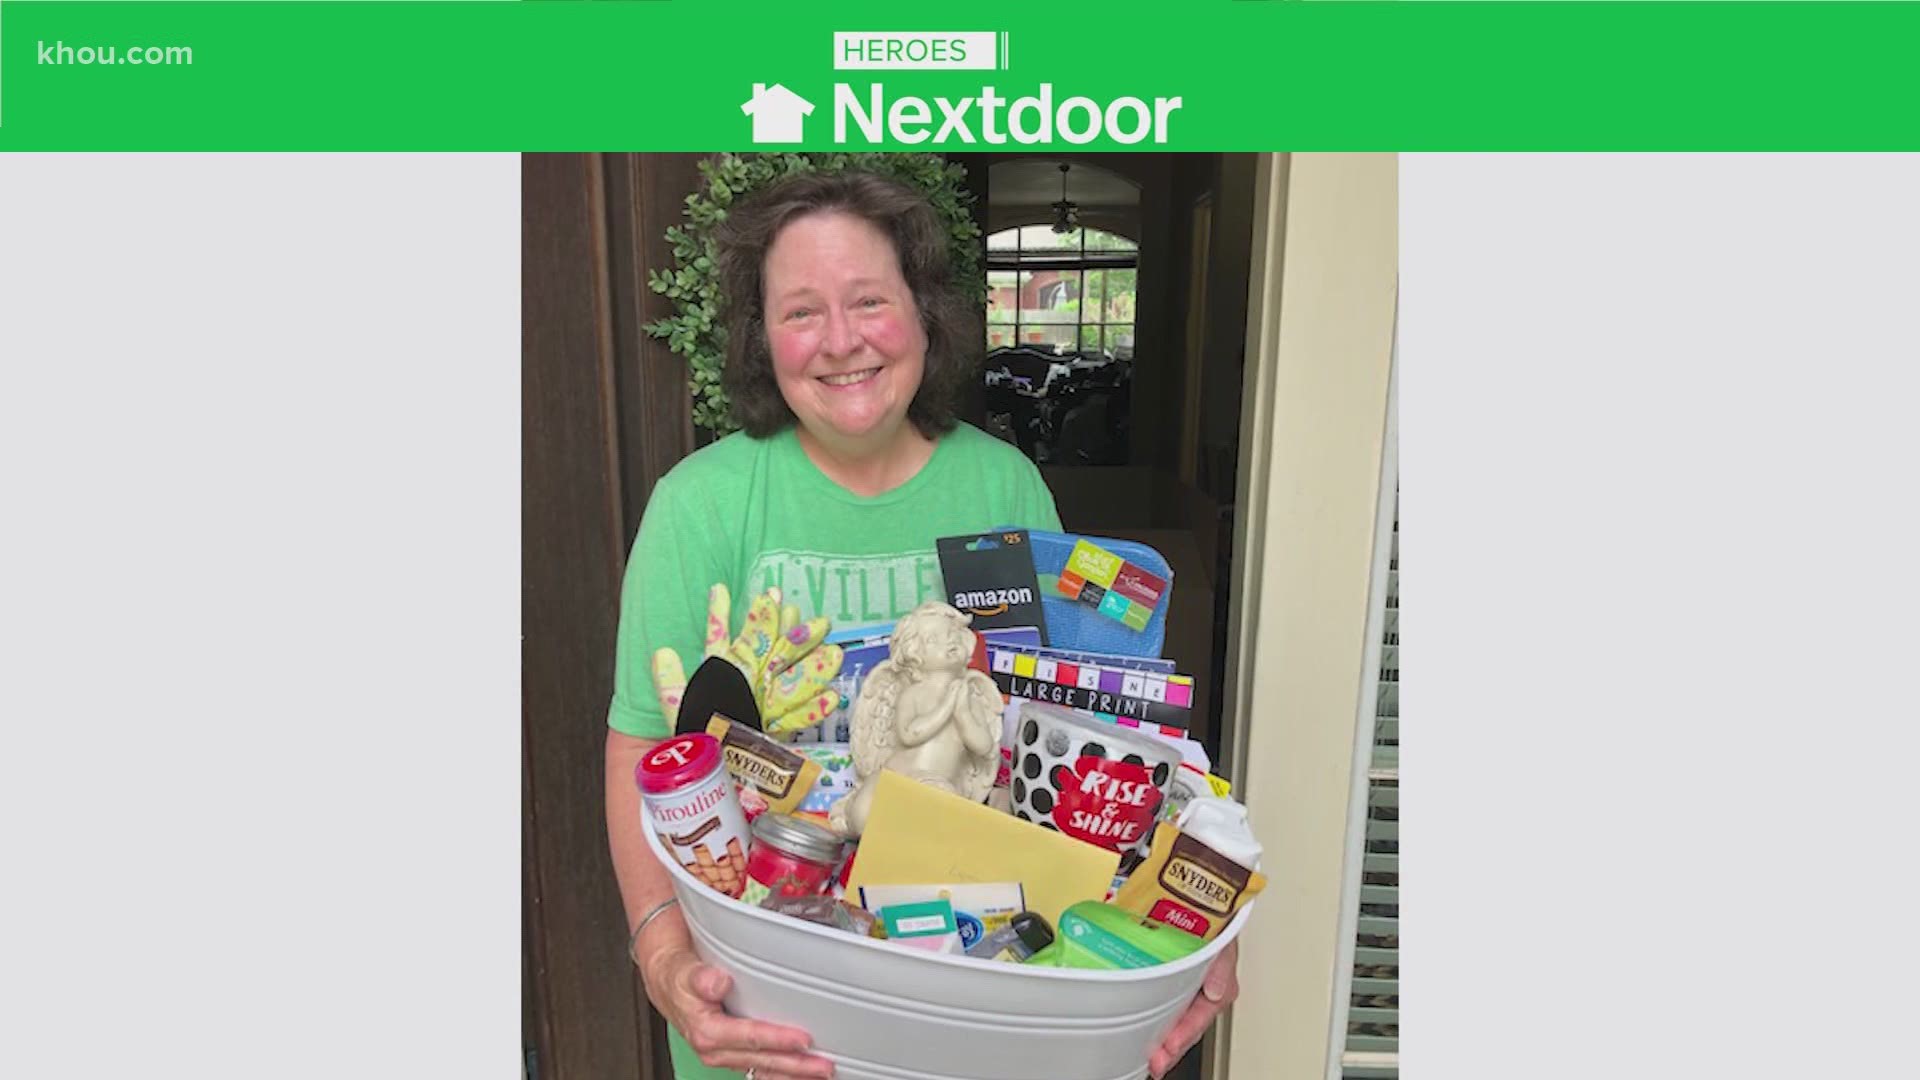 Neighbors in the Willowlake community in northwest Houston surprised an elderly woman with a basket full of goodies, reminding her she is appreciated.